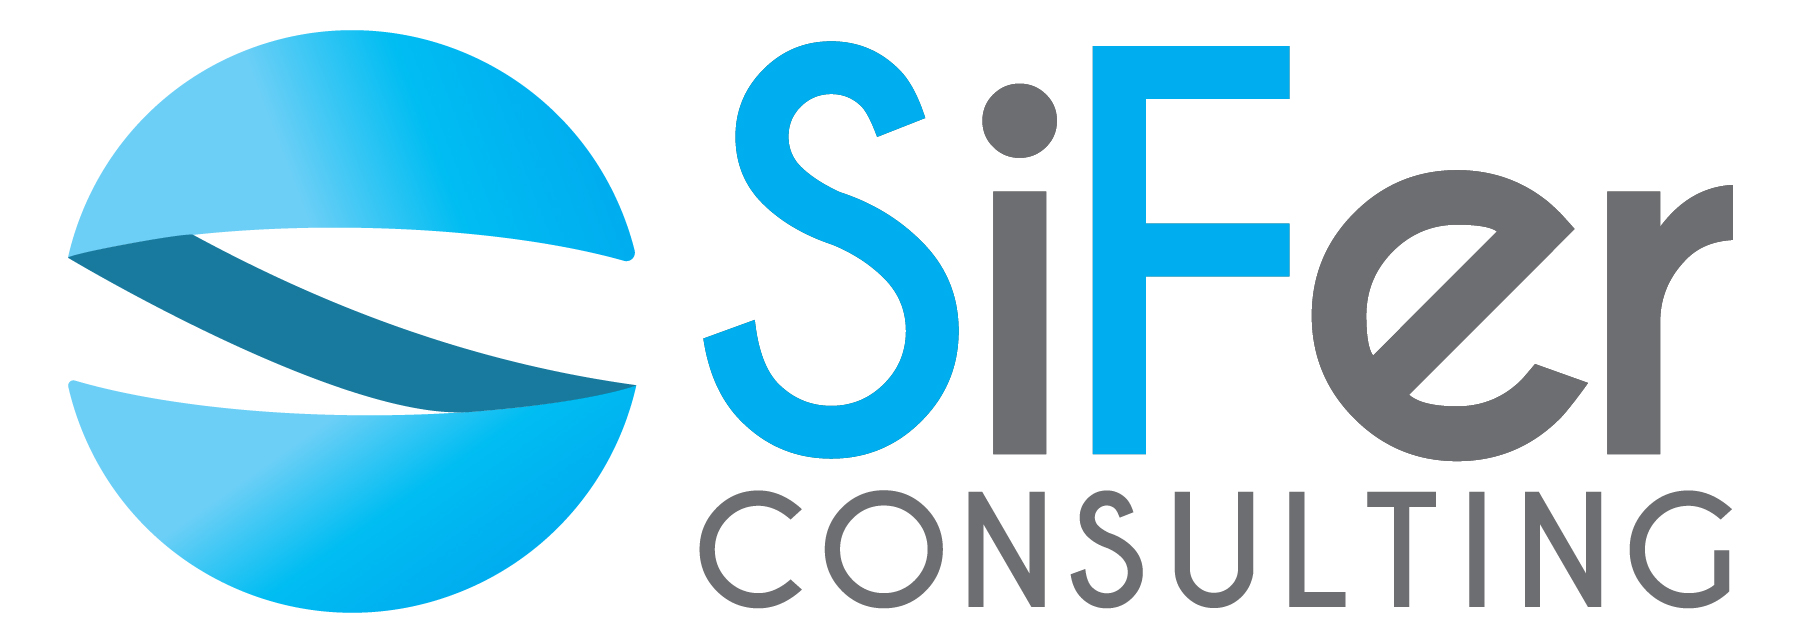 SiFer Consulting 